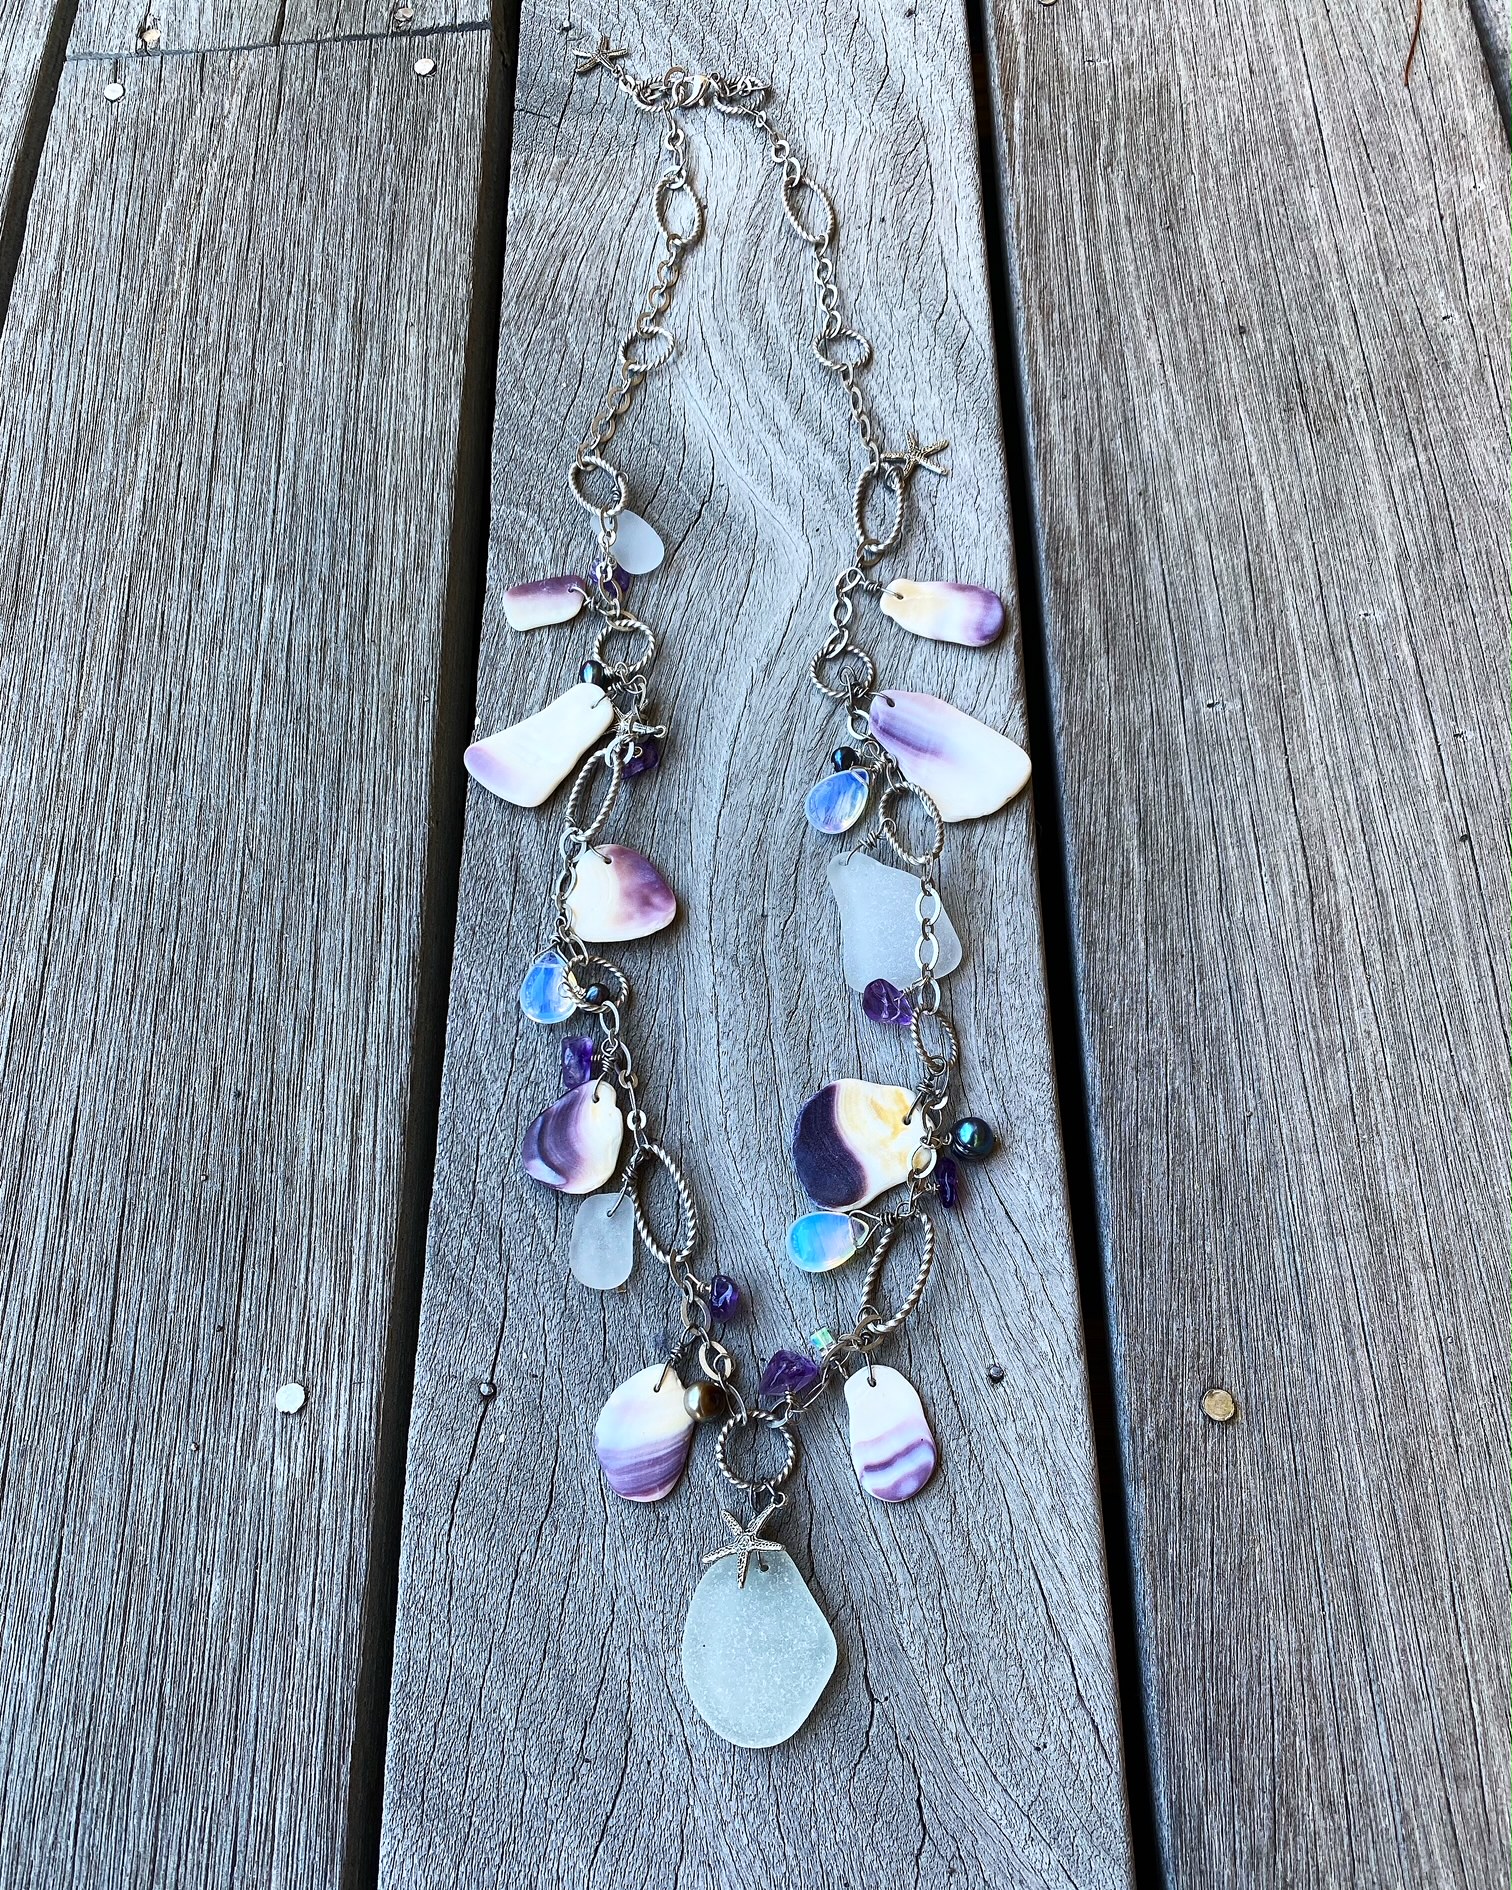 A necklace from Island Bead & Trading Co. in Eastport